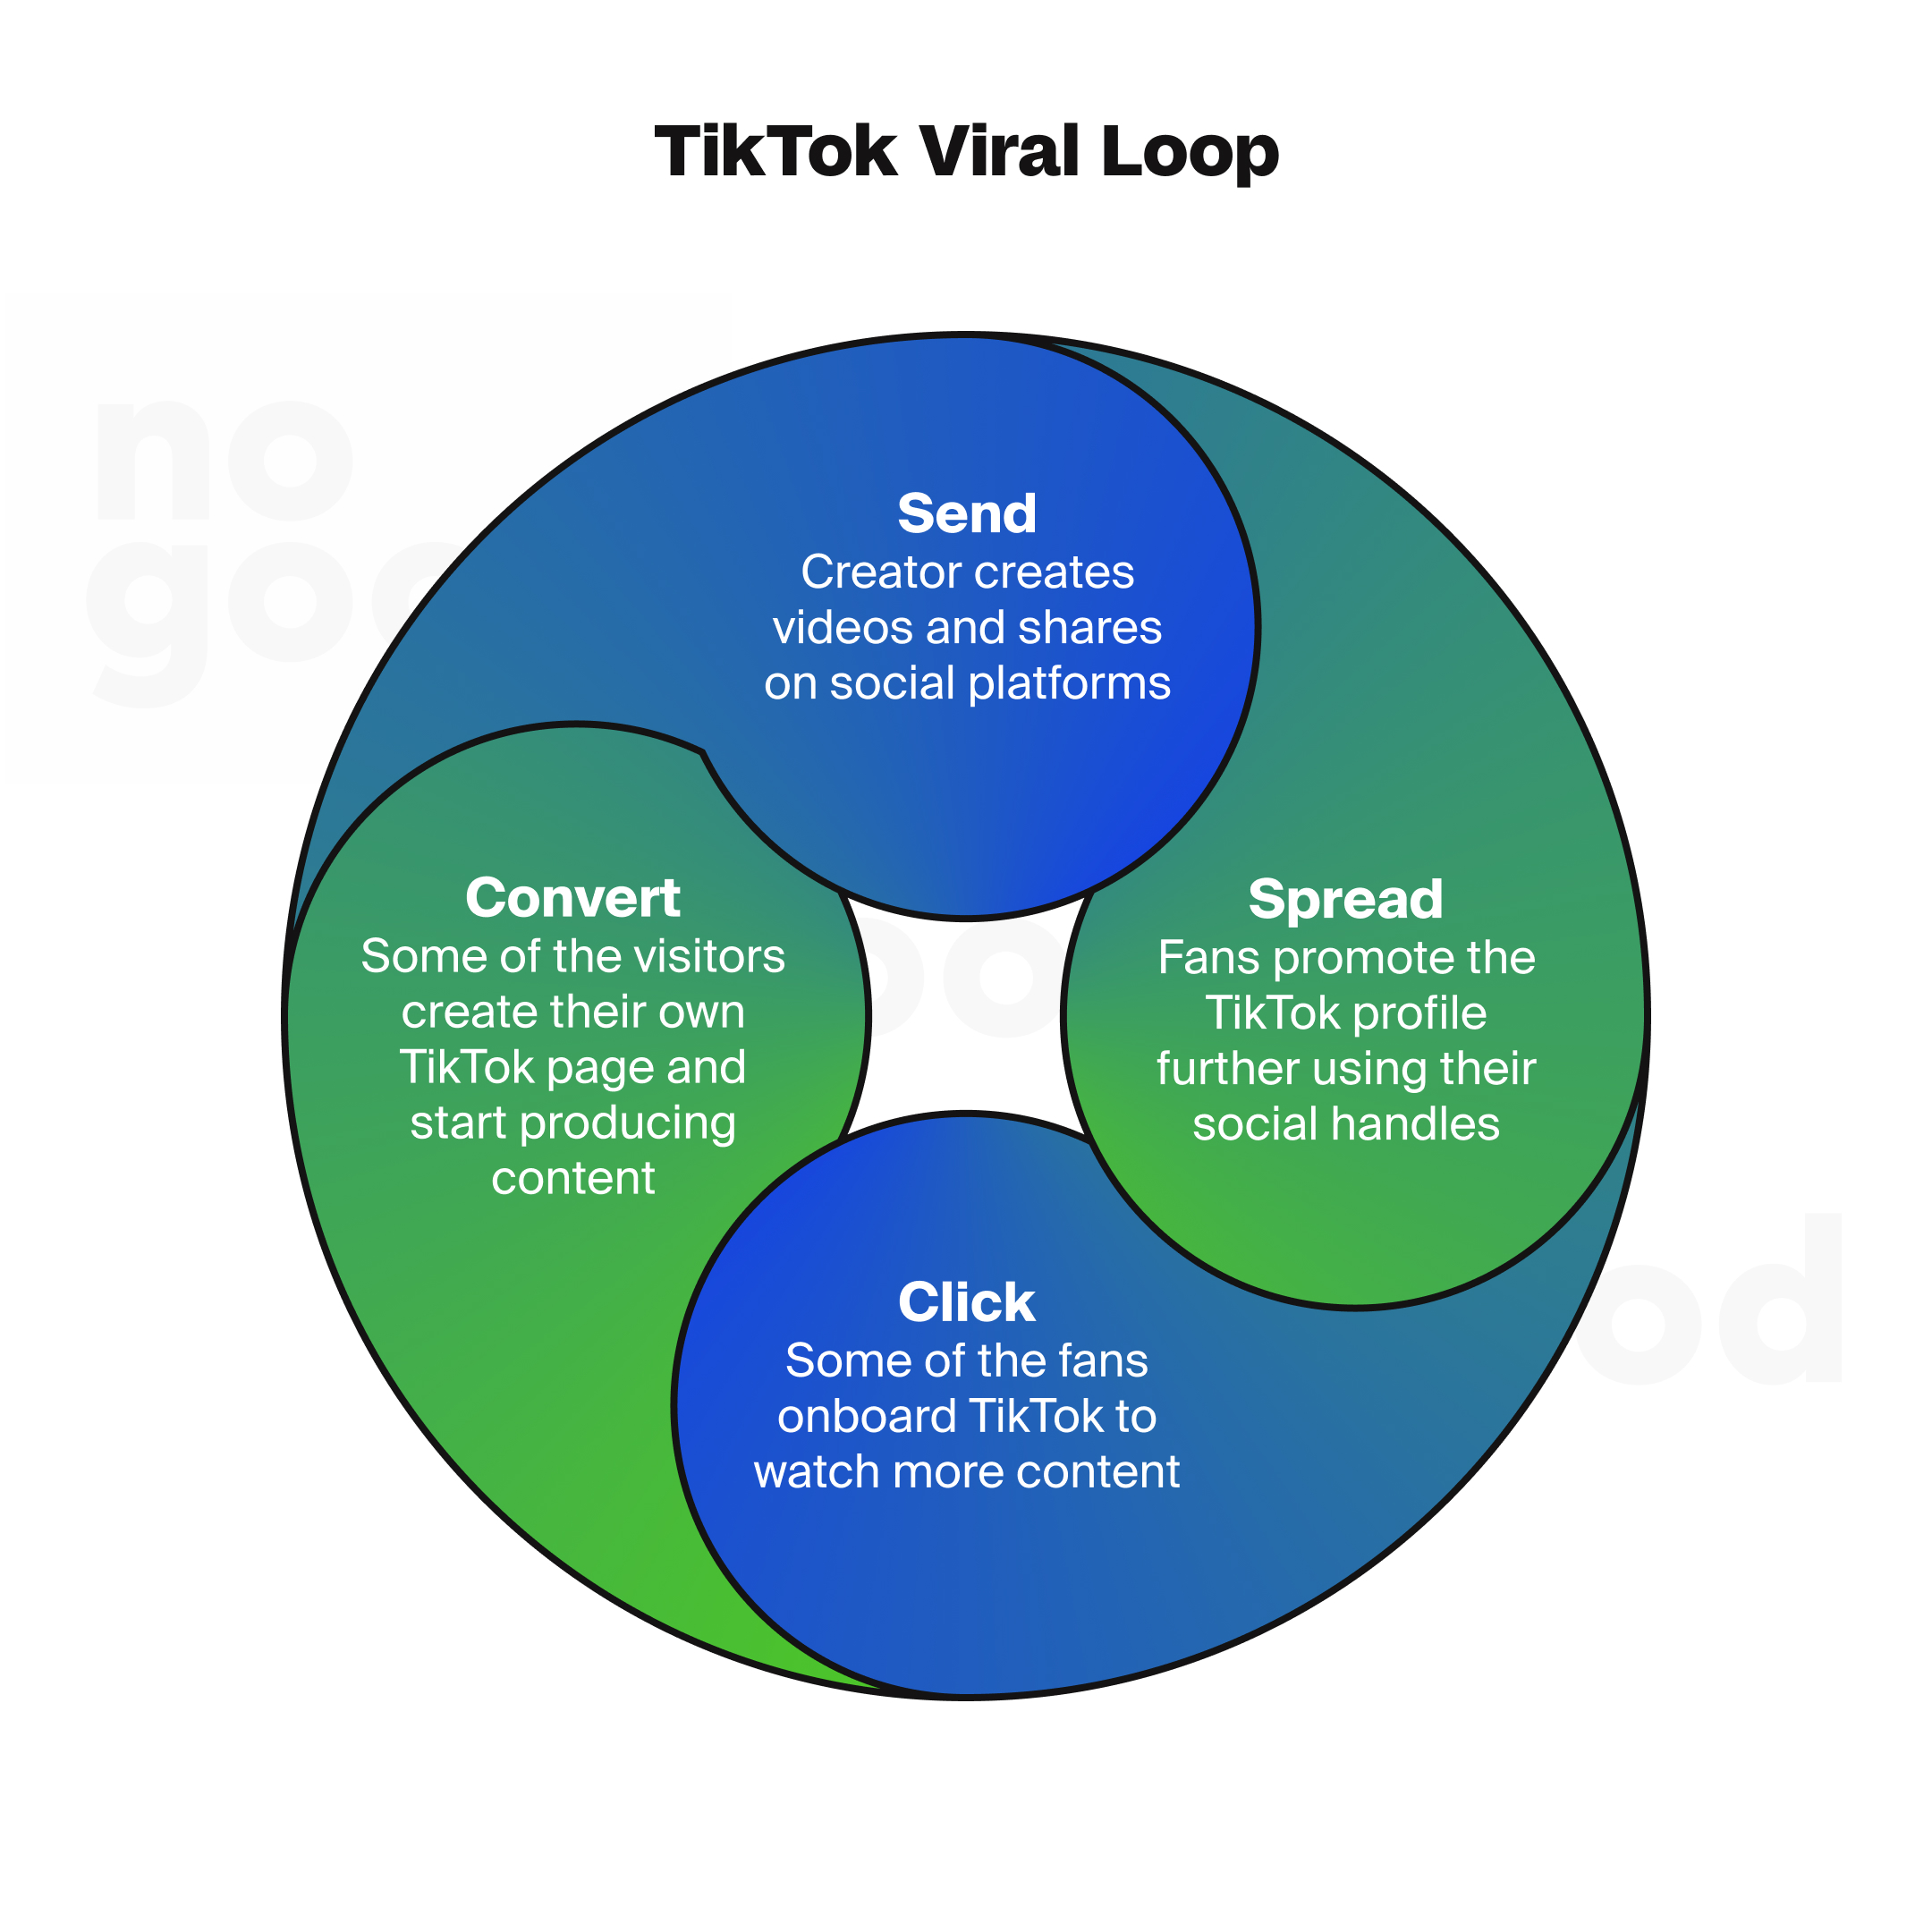 The TikTok viral loop entails spend, spread, click, and convert stages.